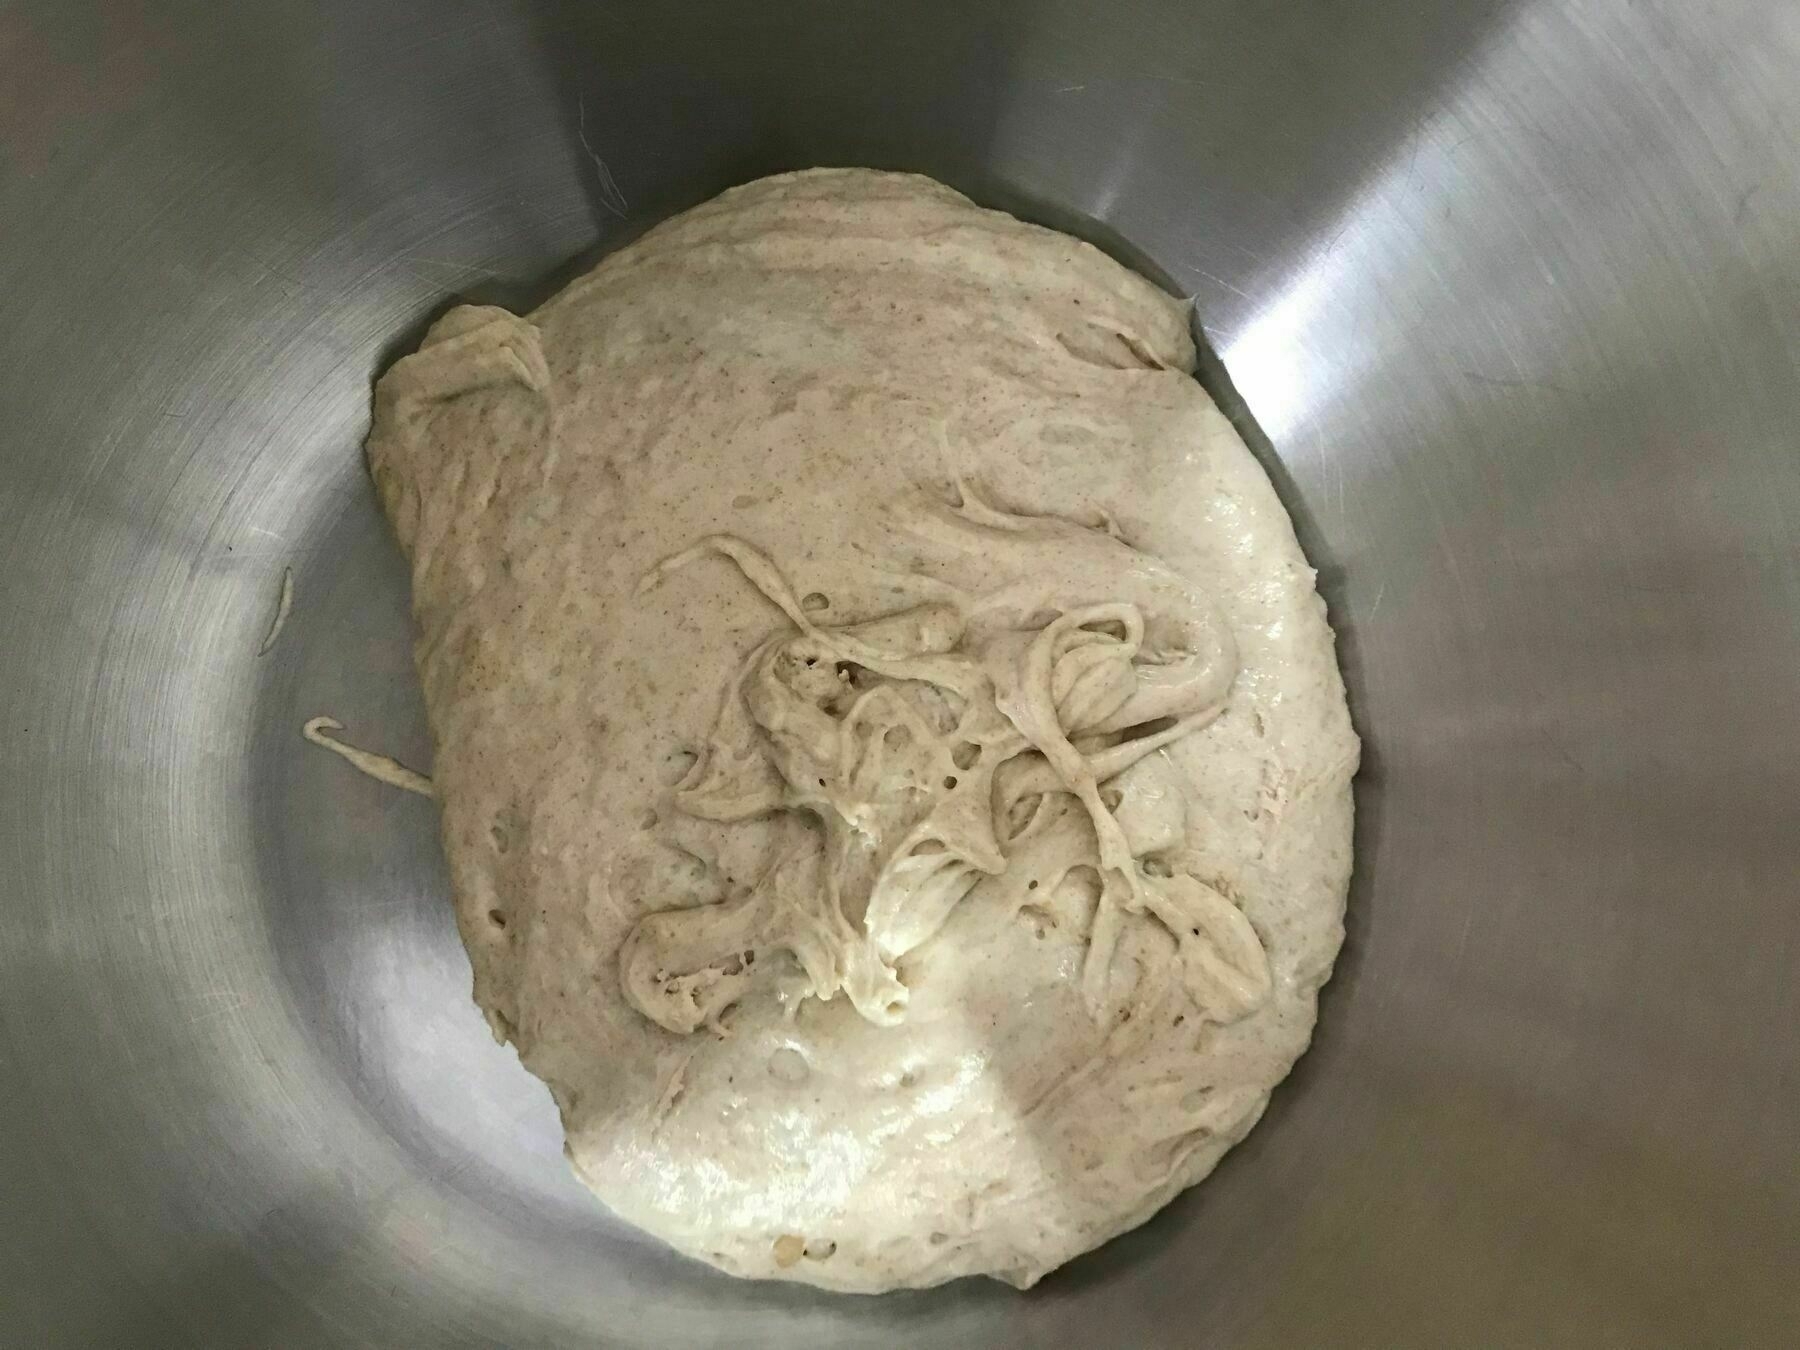 Some bread dough in a stainless steel bowl.